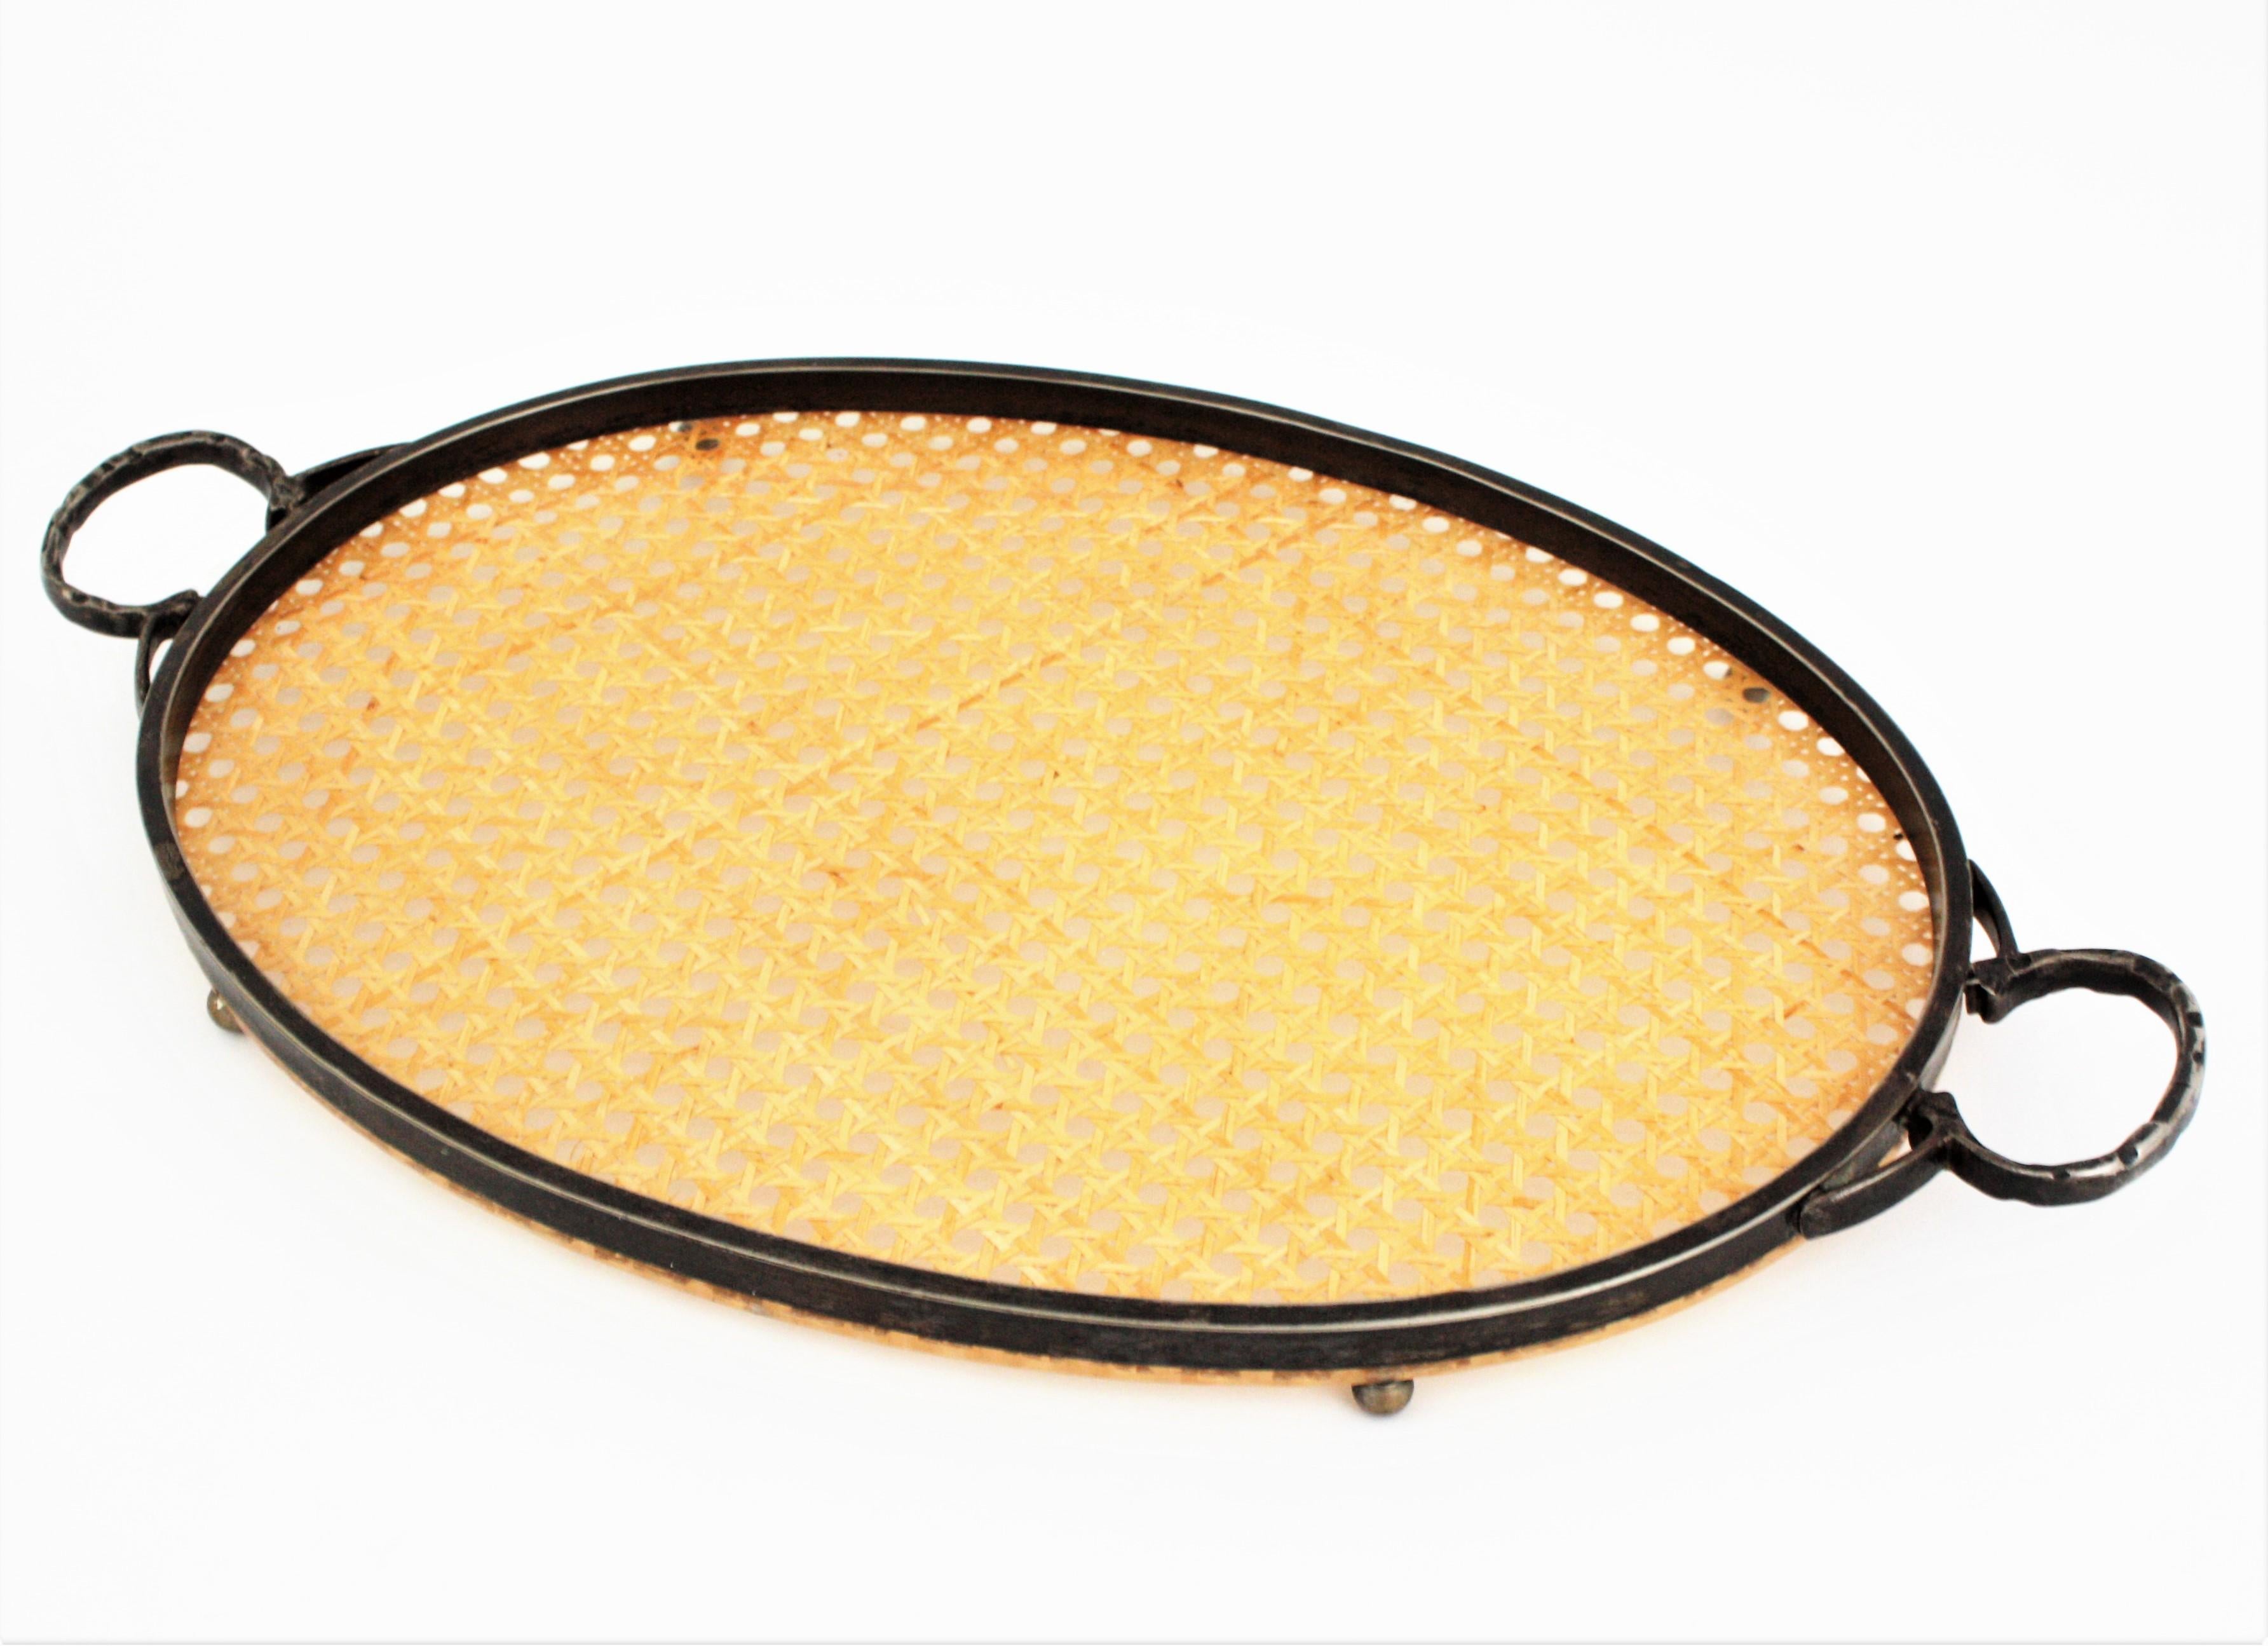 Hand-Crafted Christian Dior Style Oval Serving Tray in Rattan, Lucite & Metal